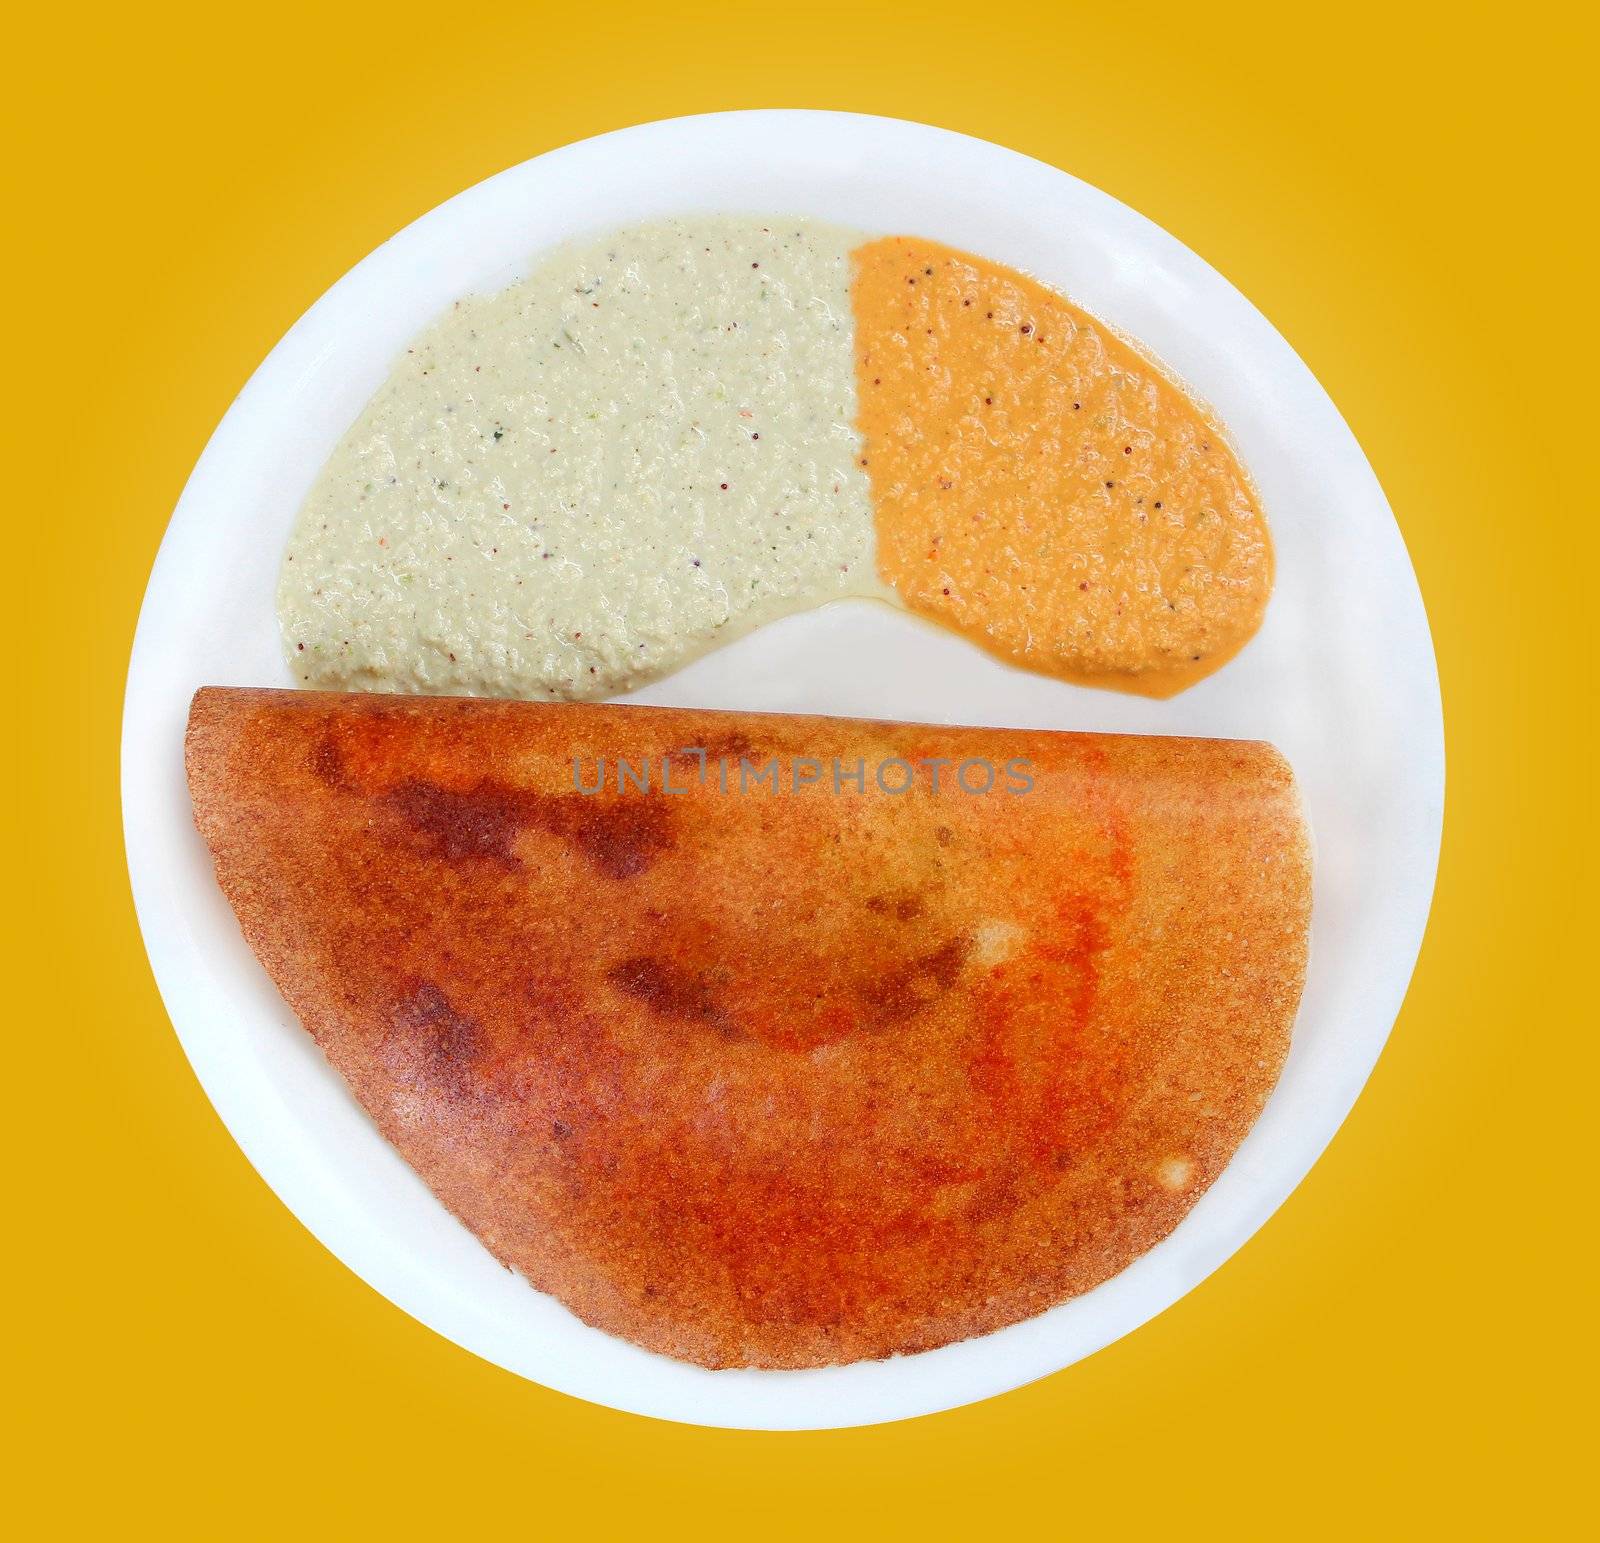 Masala dosa with different types of chutney on a plate with clipping mask for easy isolation